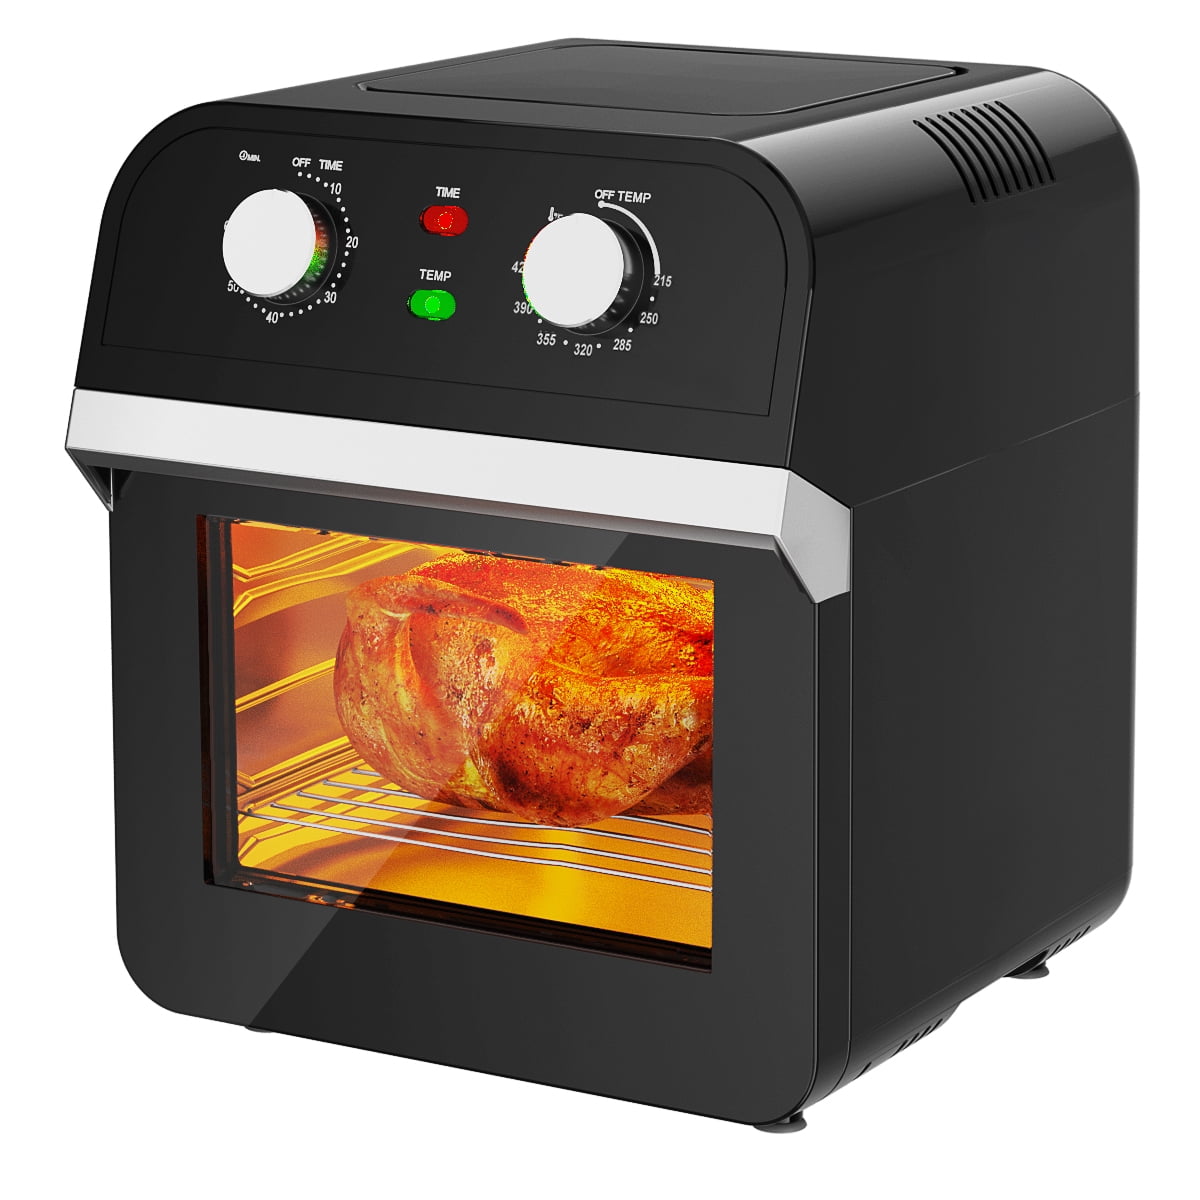 Jacgood 13 Quart Air Fryer, Rotisserie and Convection Oven, 10-in-1 Air  Fry, 1800W Electric Air Fryer Toaster Oven,Roast, Bake, Dehydrate and Warm